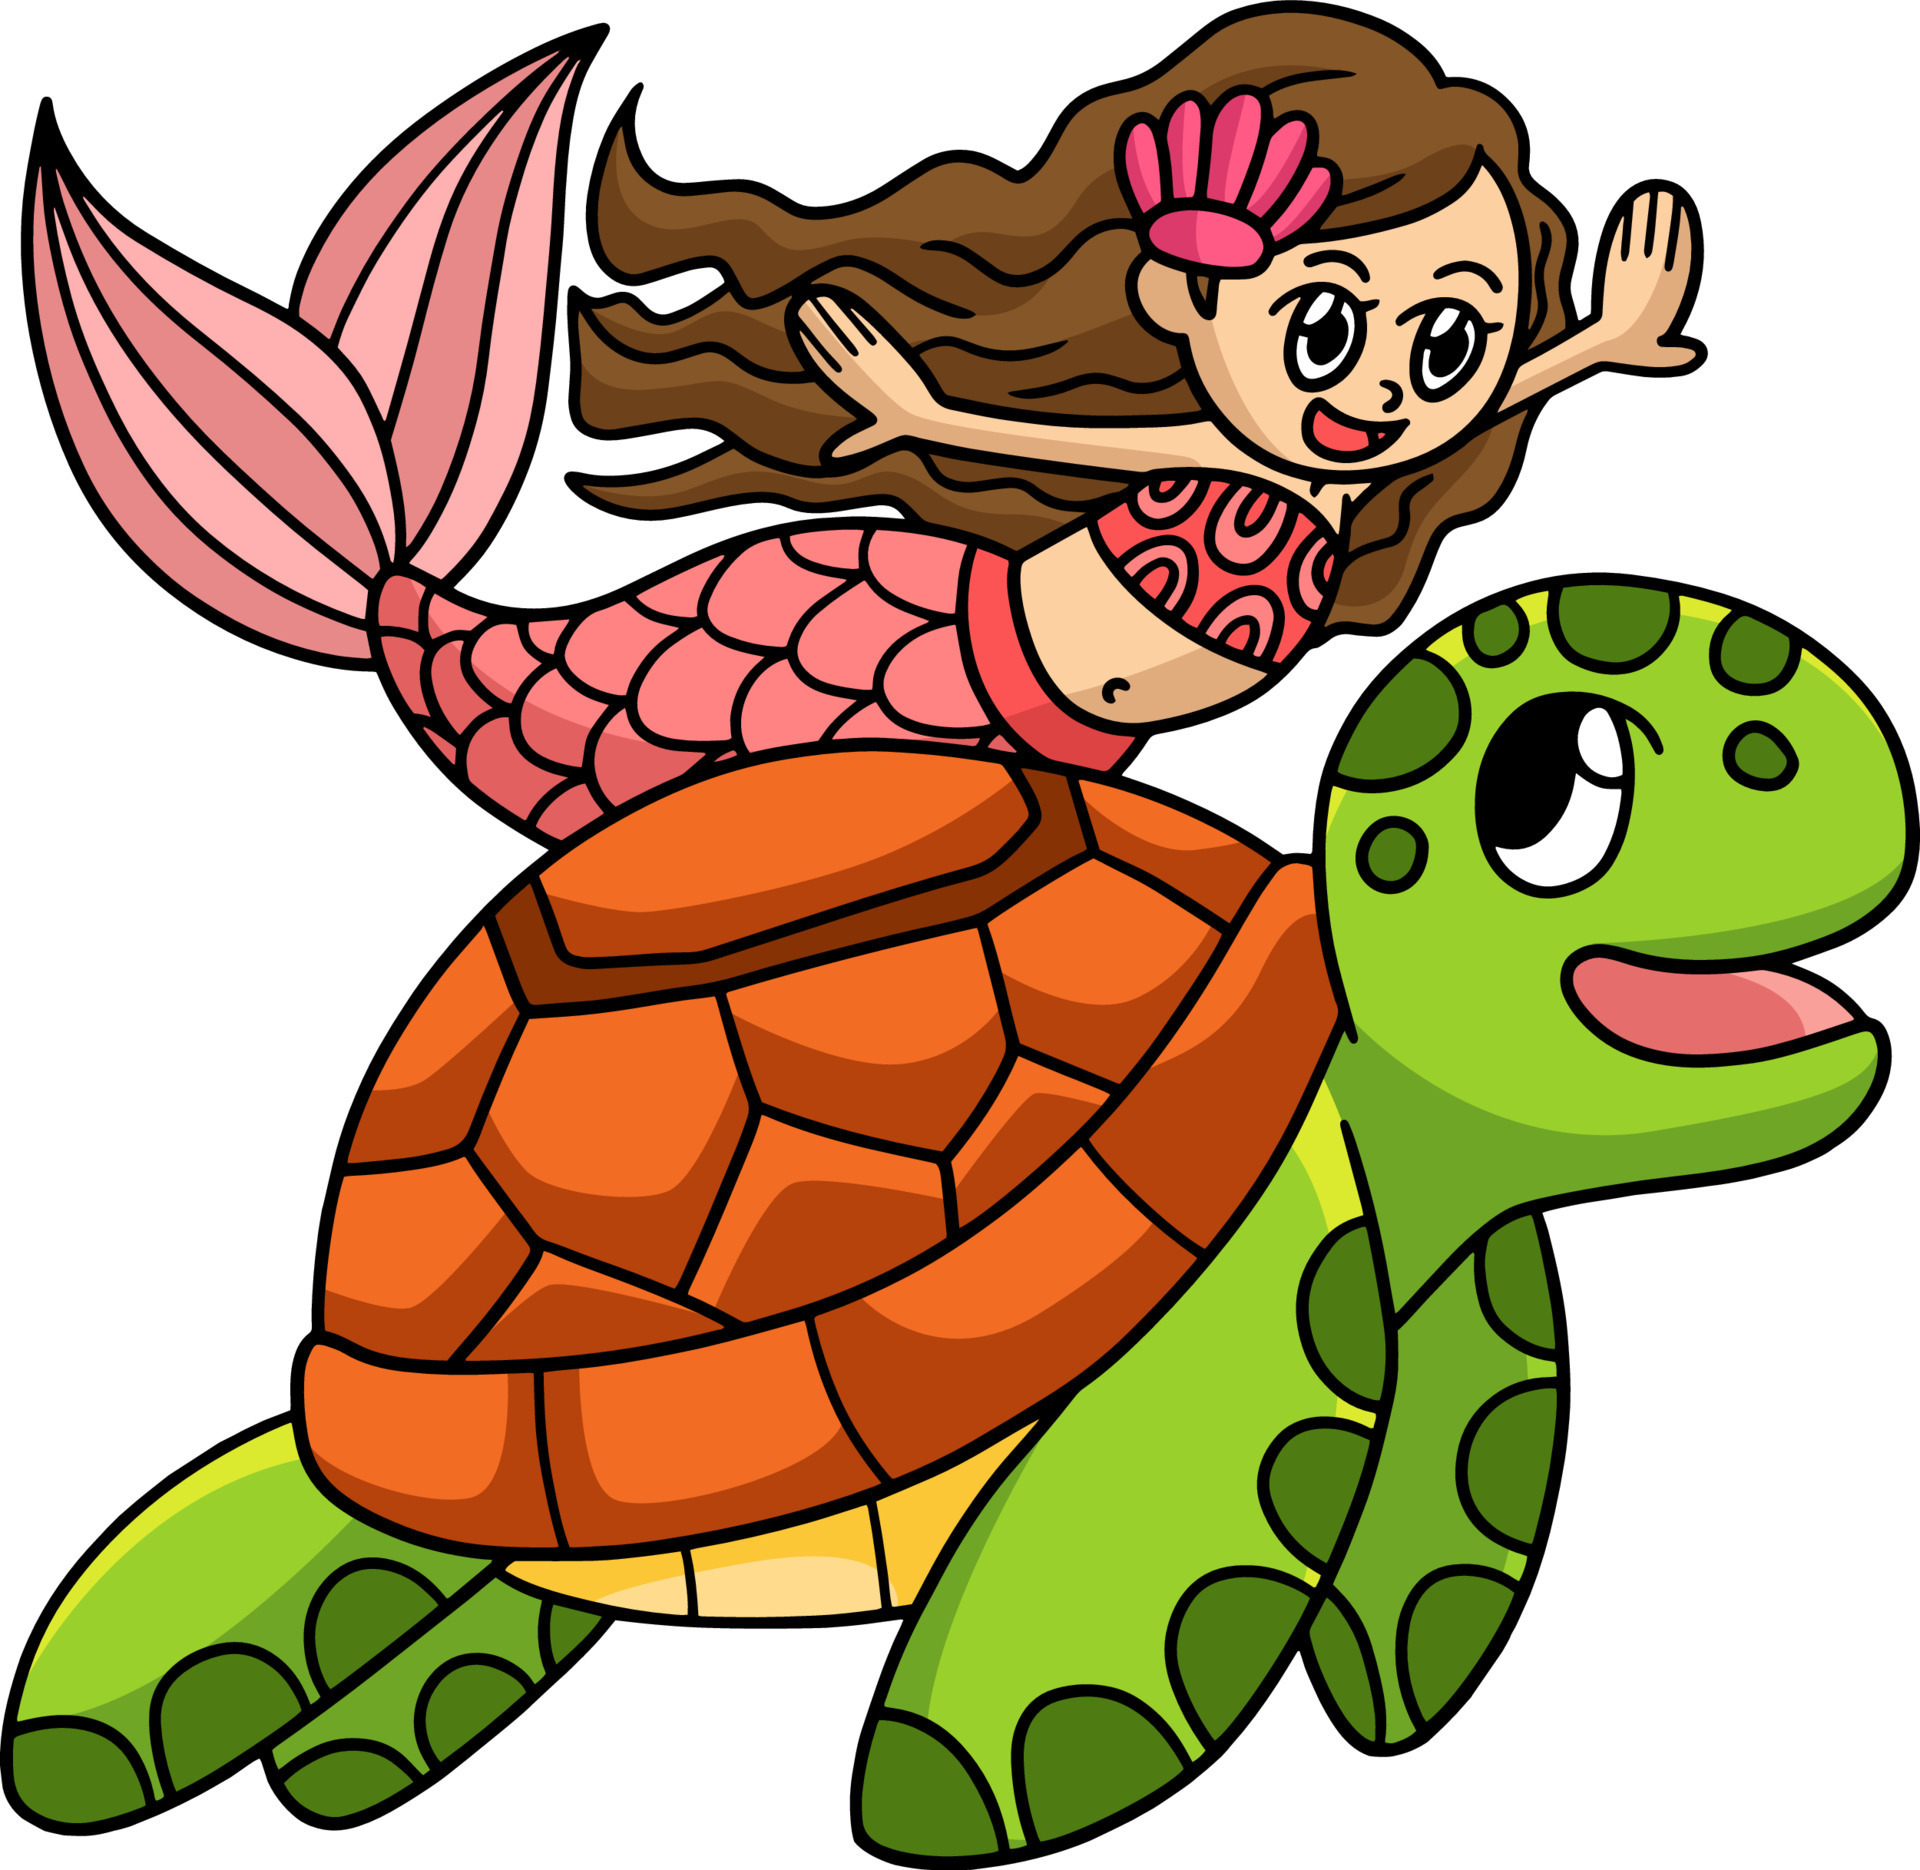 Mermaid And Turtle Cartoon Colored Clipart 8208760 Vector Art at Vecteezy